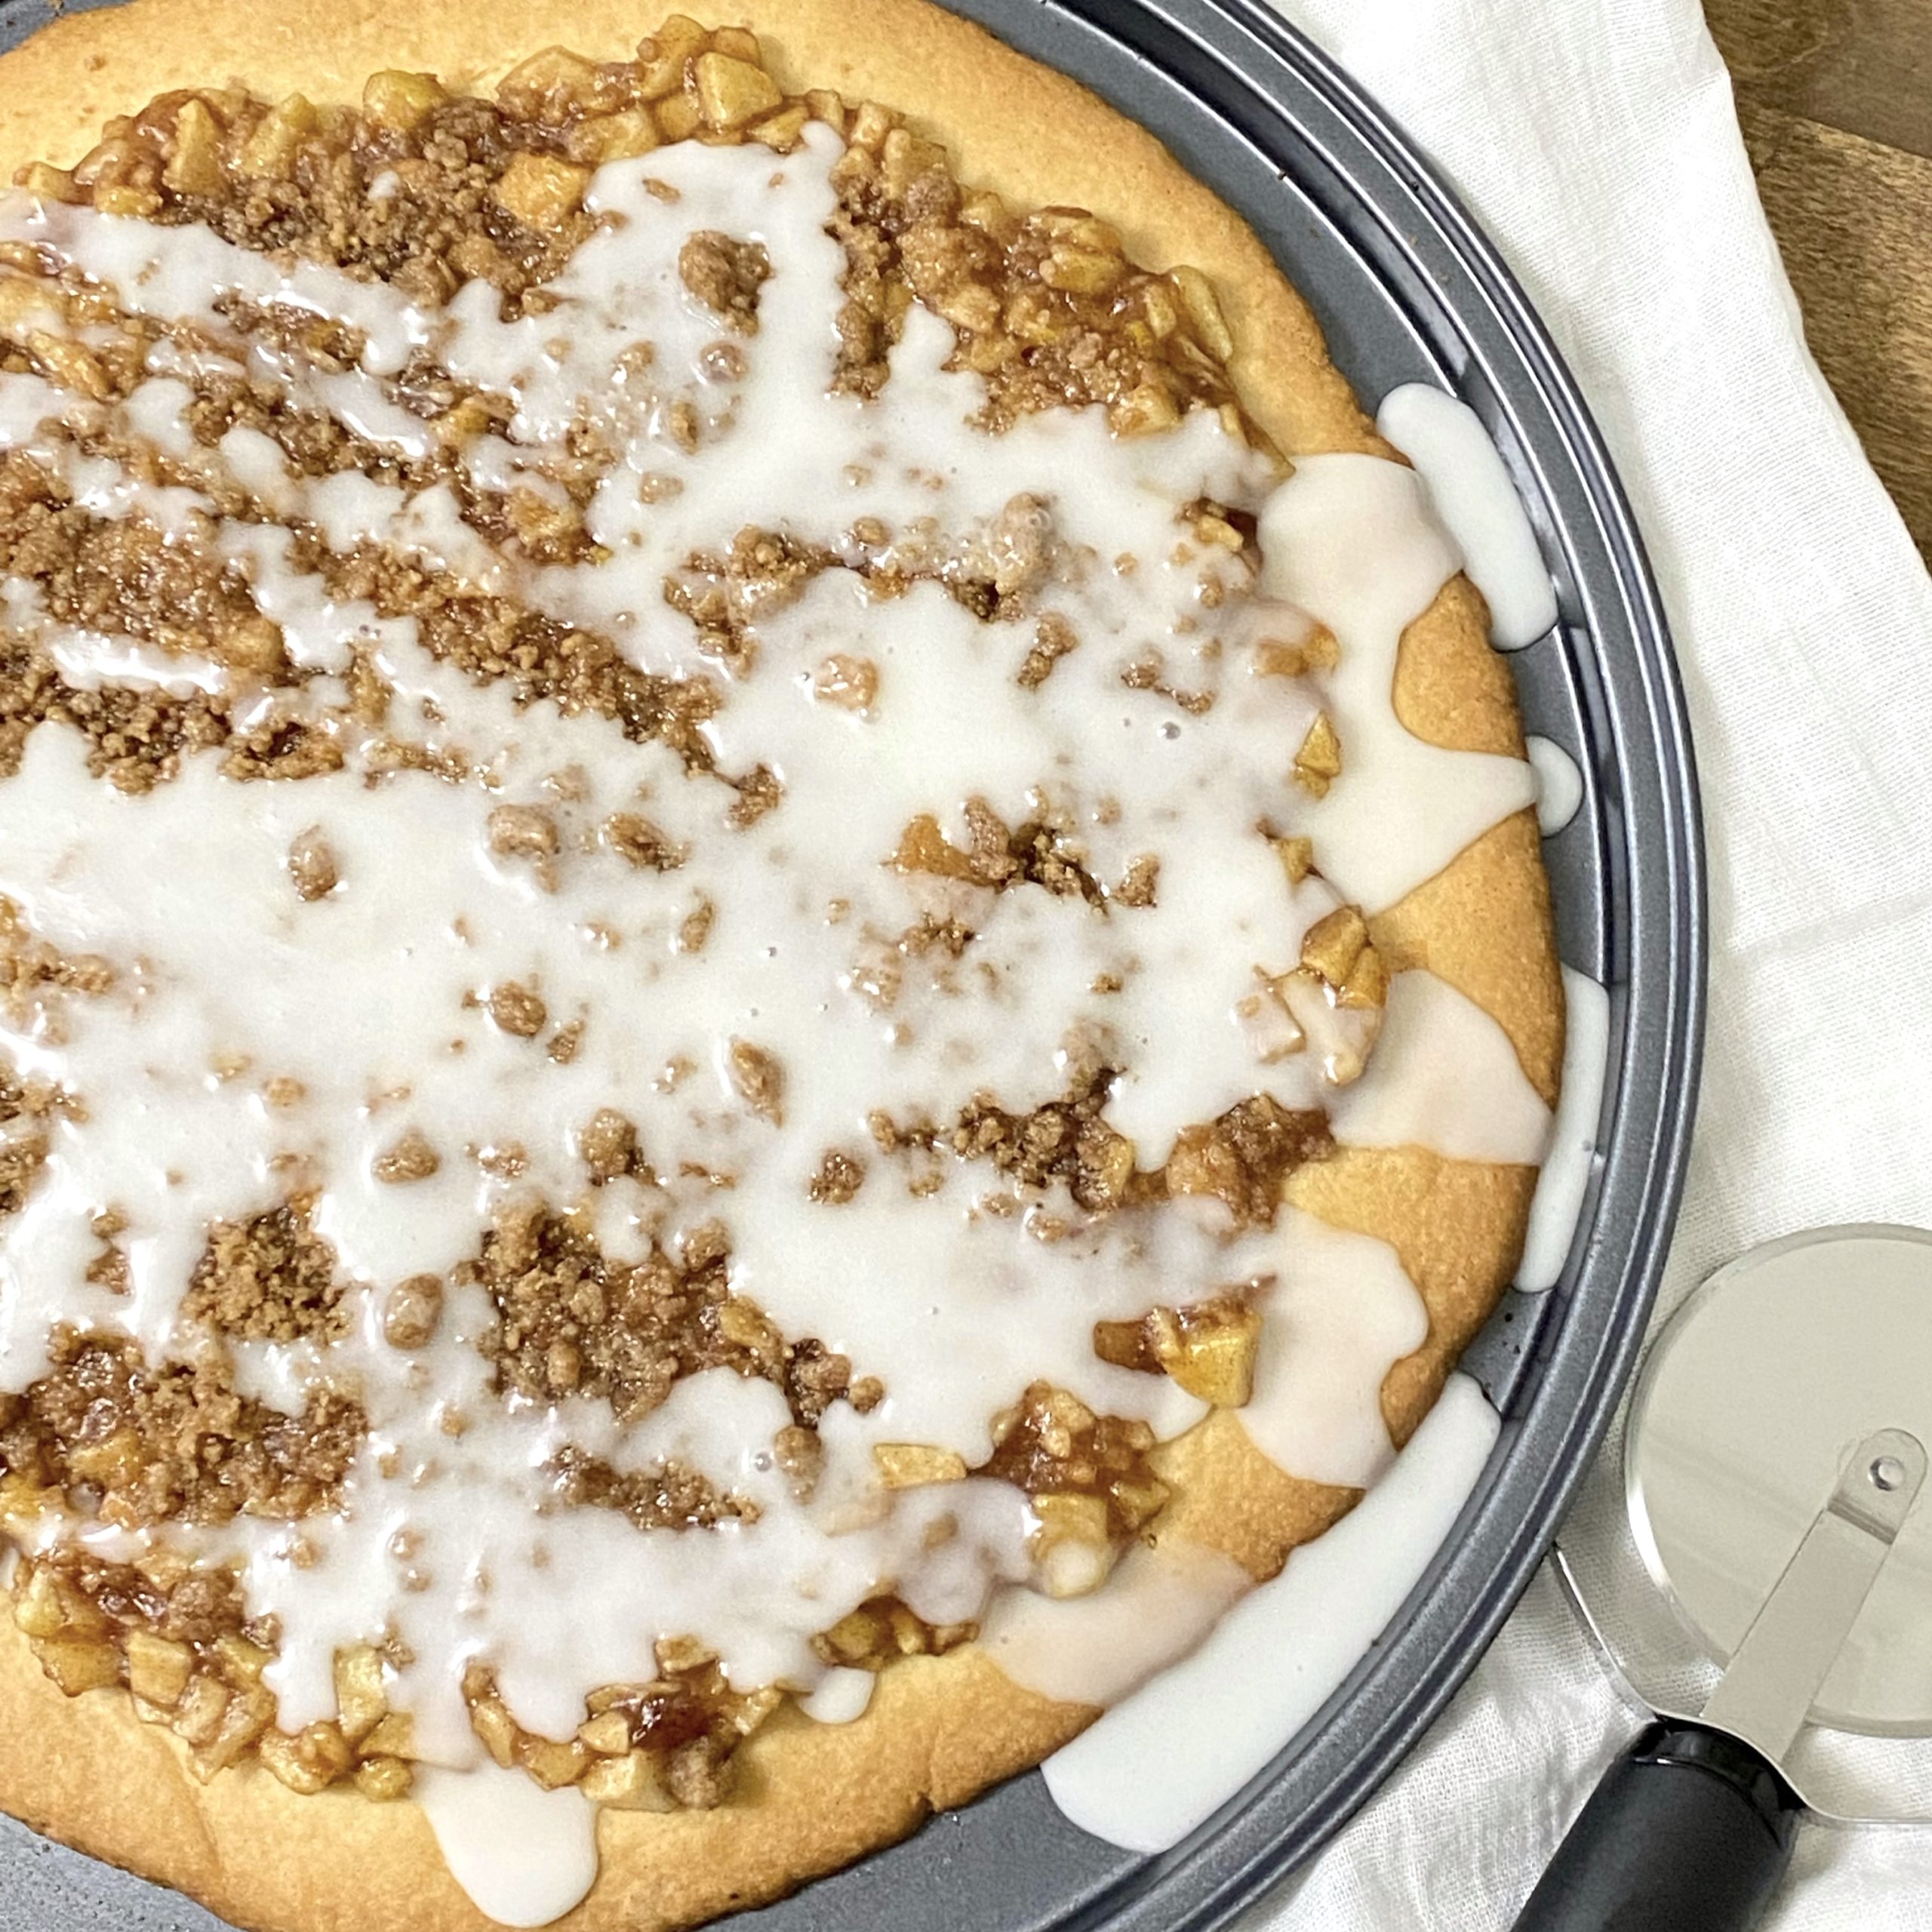 Apple pie pizza with a pizza cutter next to it on the counter.